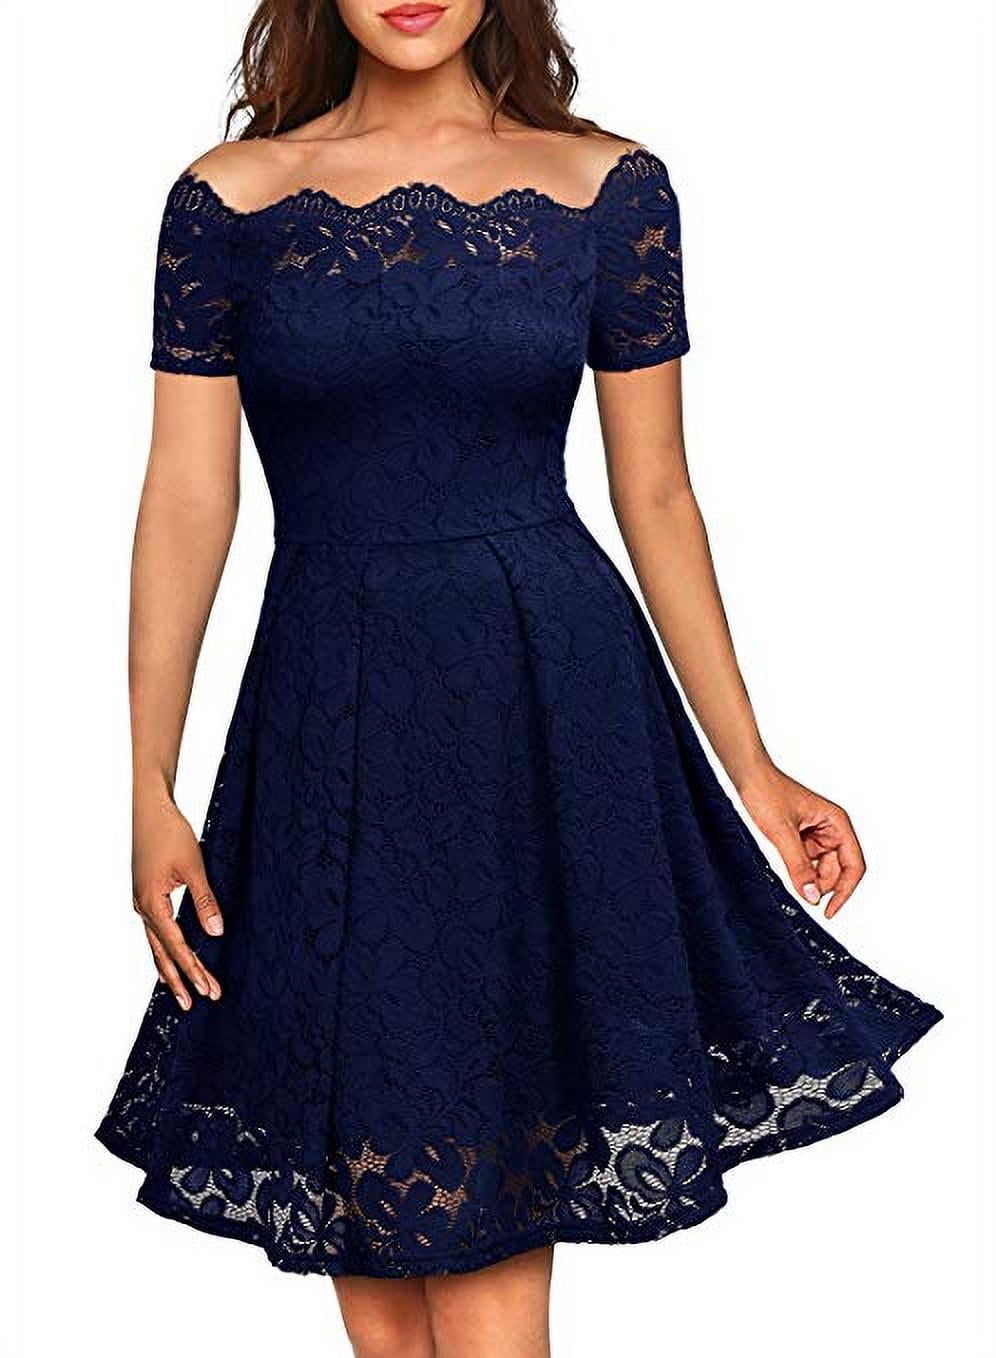 STOCK New Long Lace Evening Formal Wedding Party Prom Bridesmaid Dress Size 6-22 